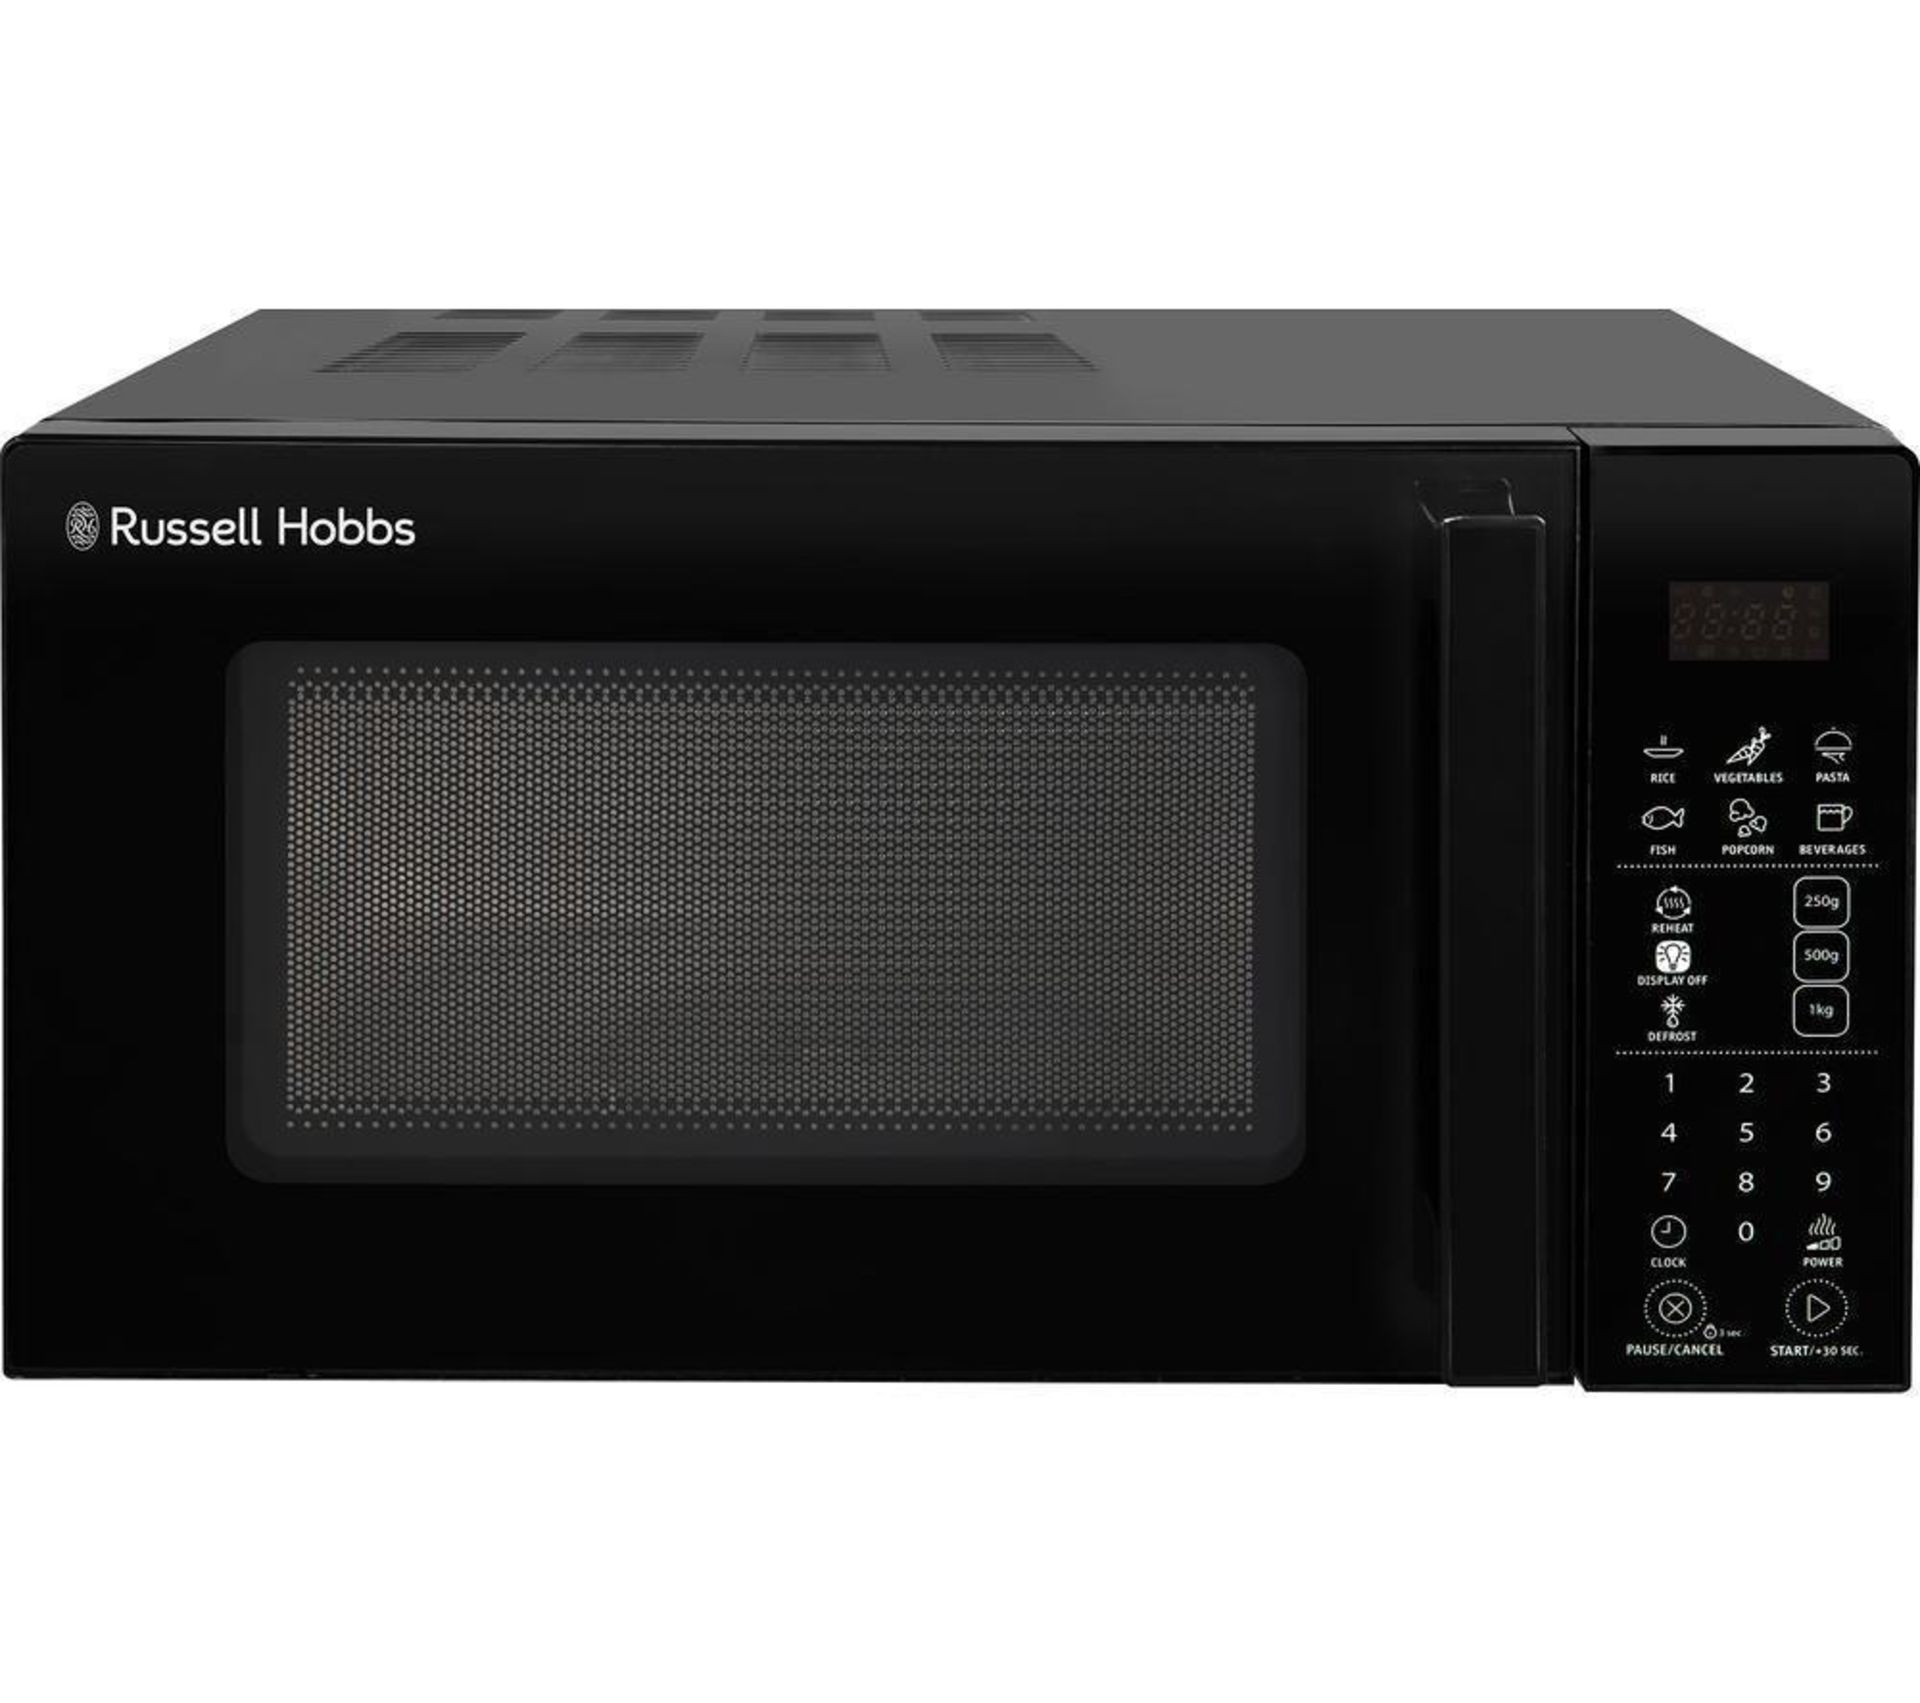 Russell Hobbs RHMT2004B 800W 20L Touch Control Digital Microwave - Black - ER47. Designed with style